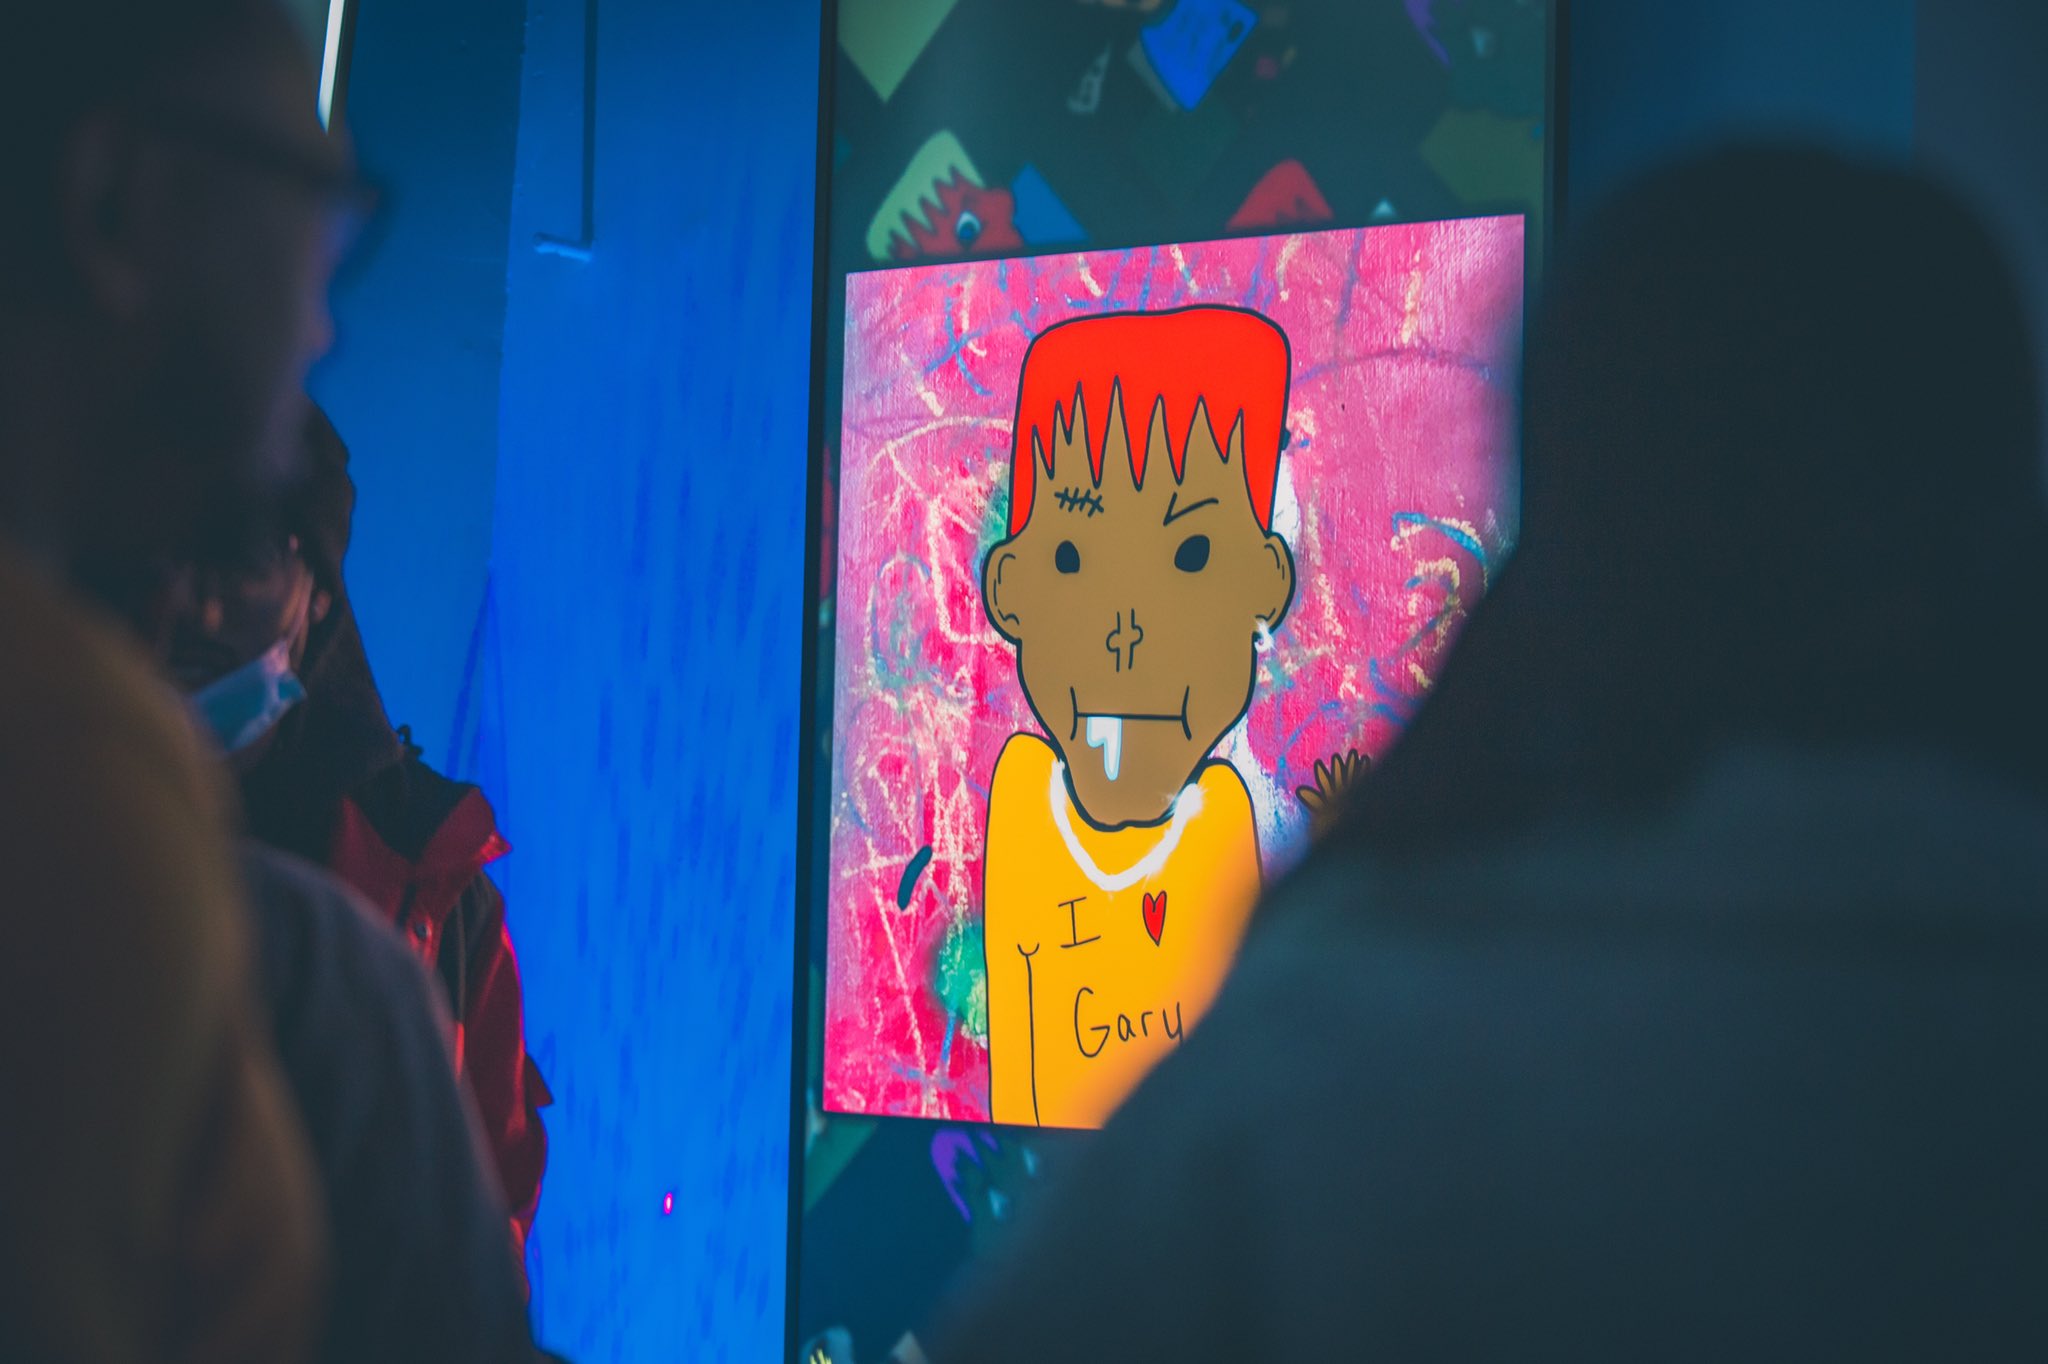 People looking at a digital illustration of a person with red hair, light brown skin wearing a yellow shirt that reads I <3 Gary